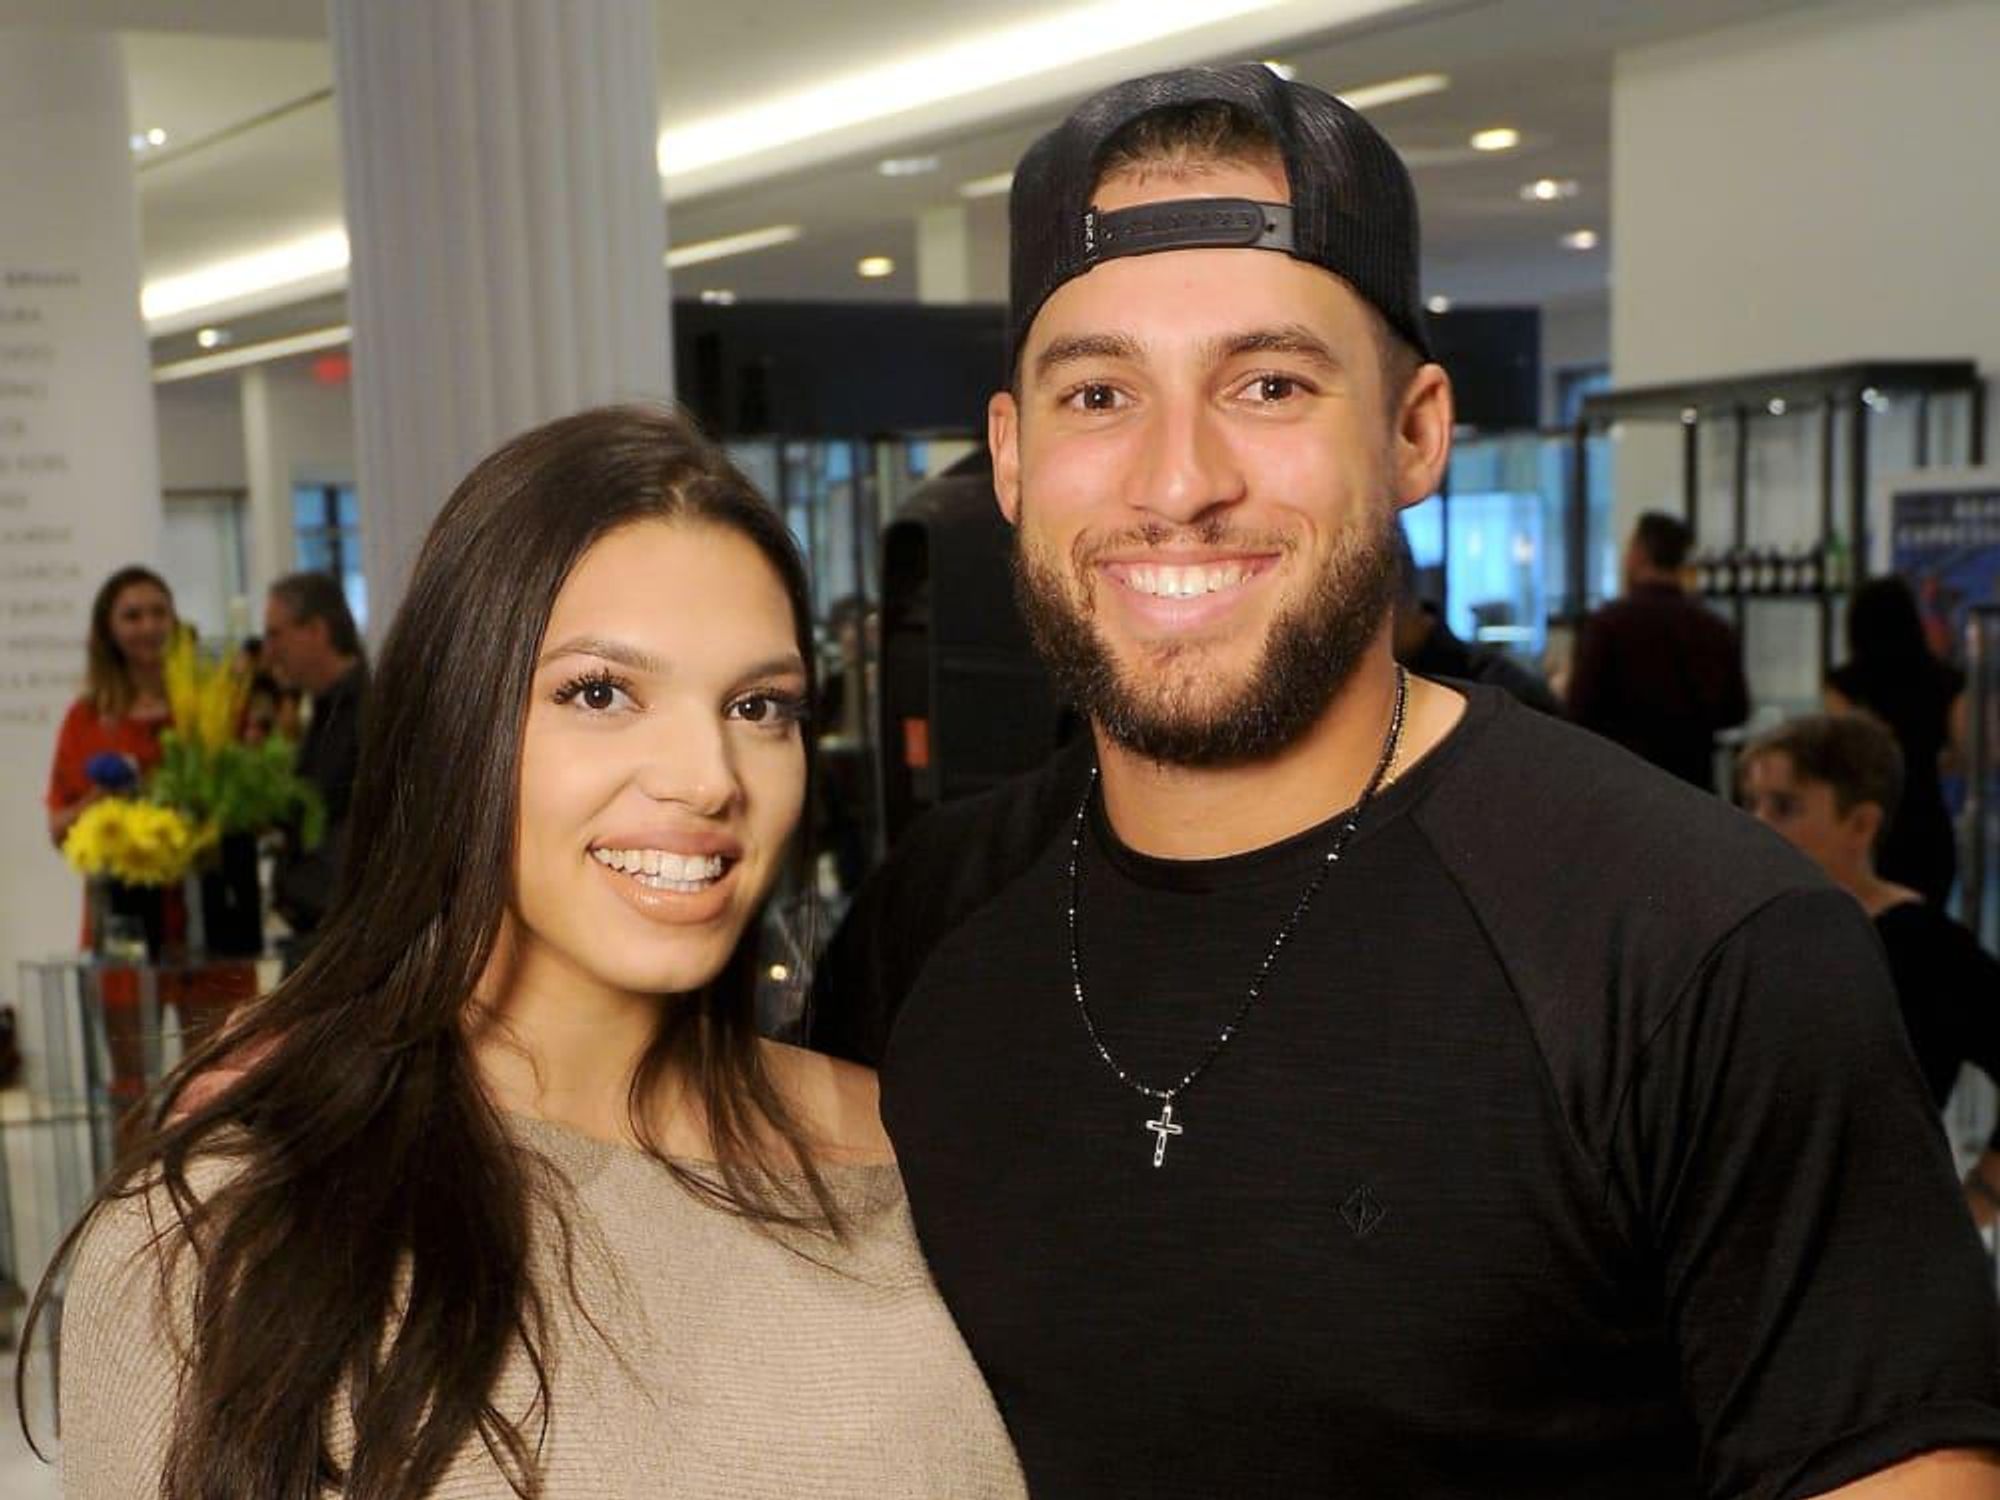 8 things to know about George Springer's future bride, Charlise Castro